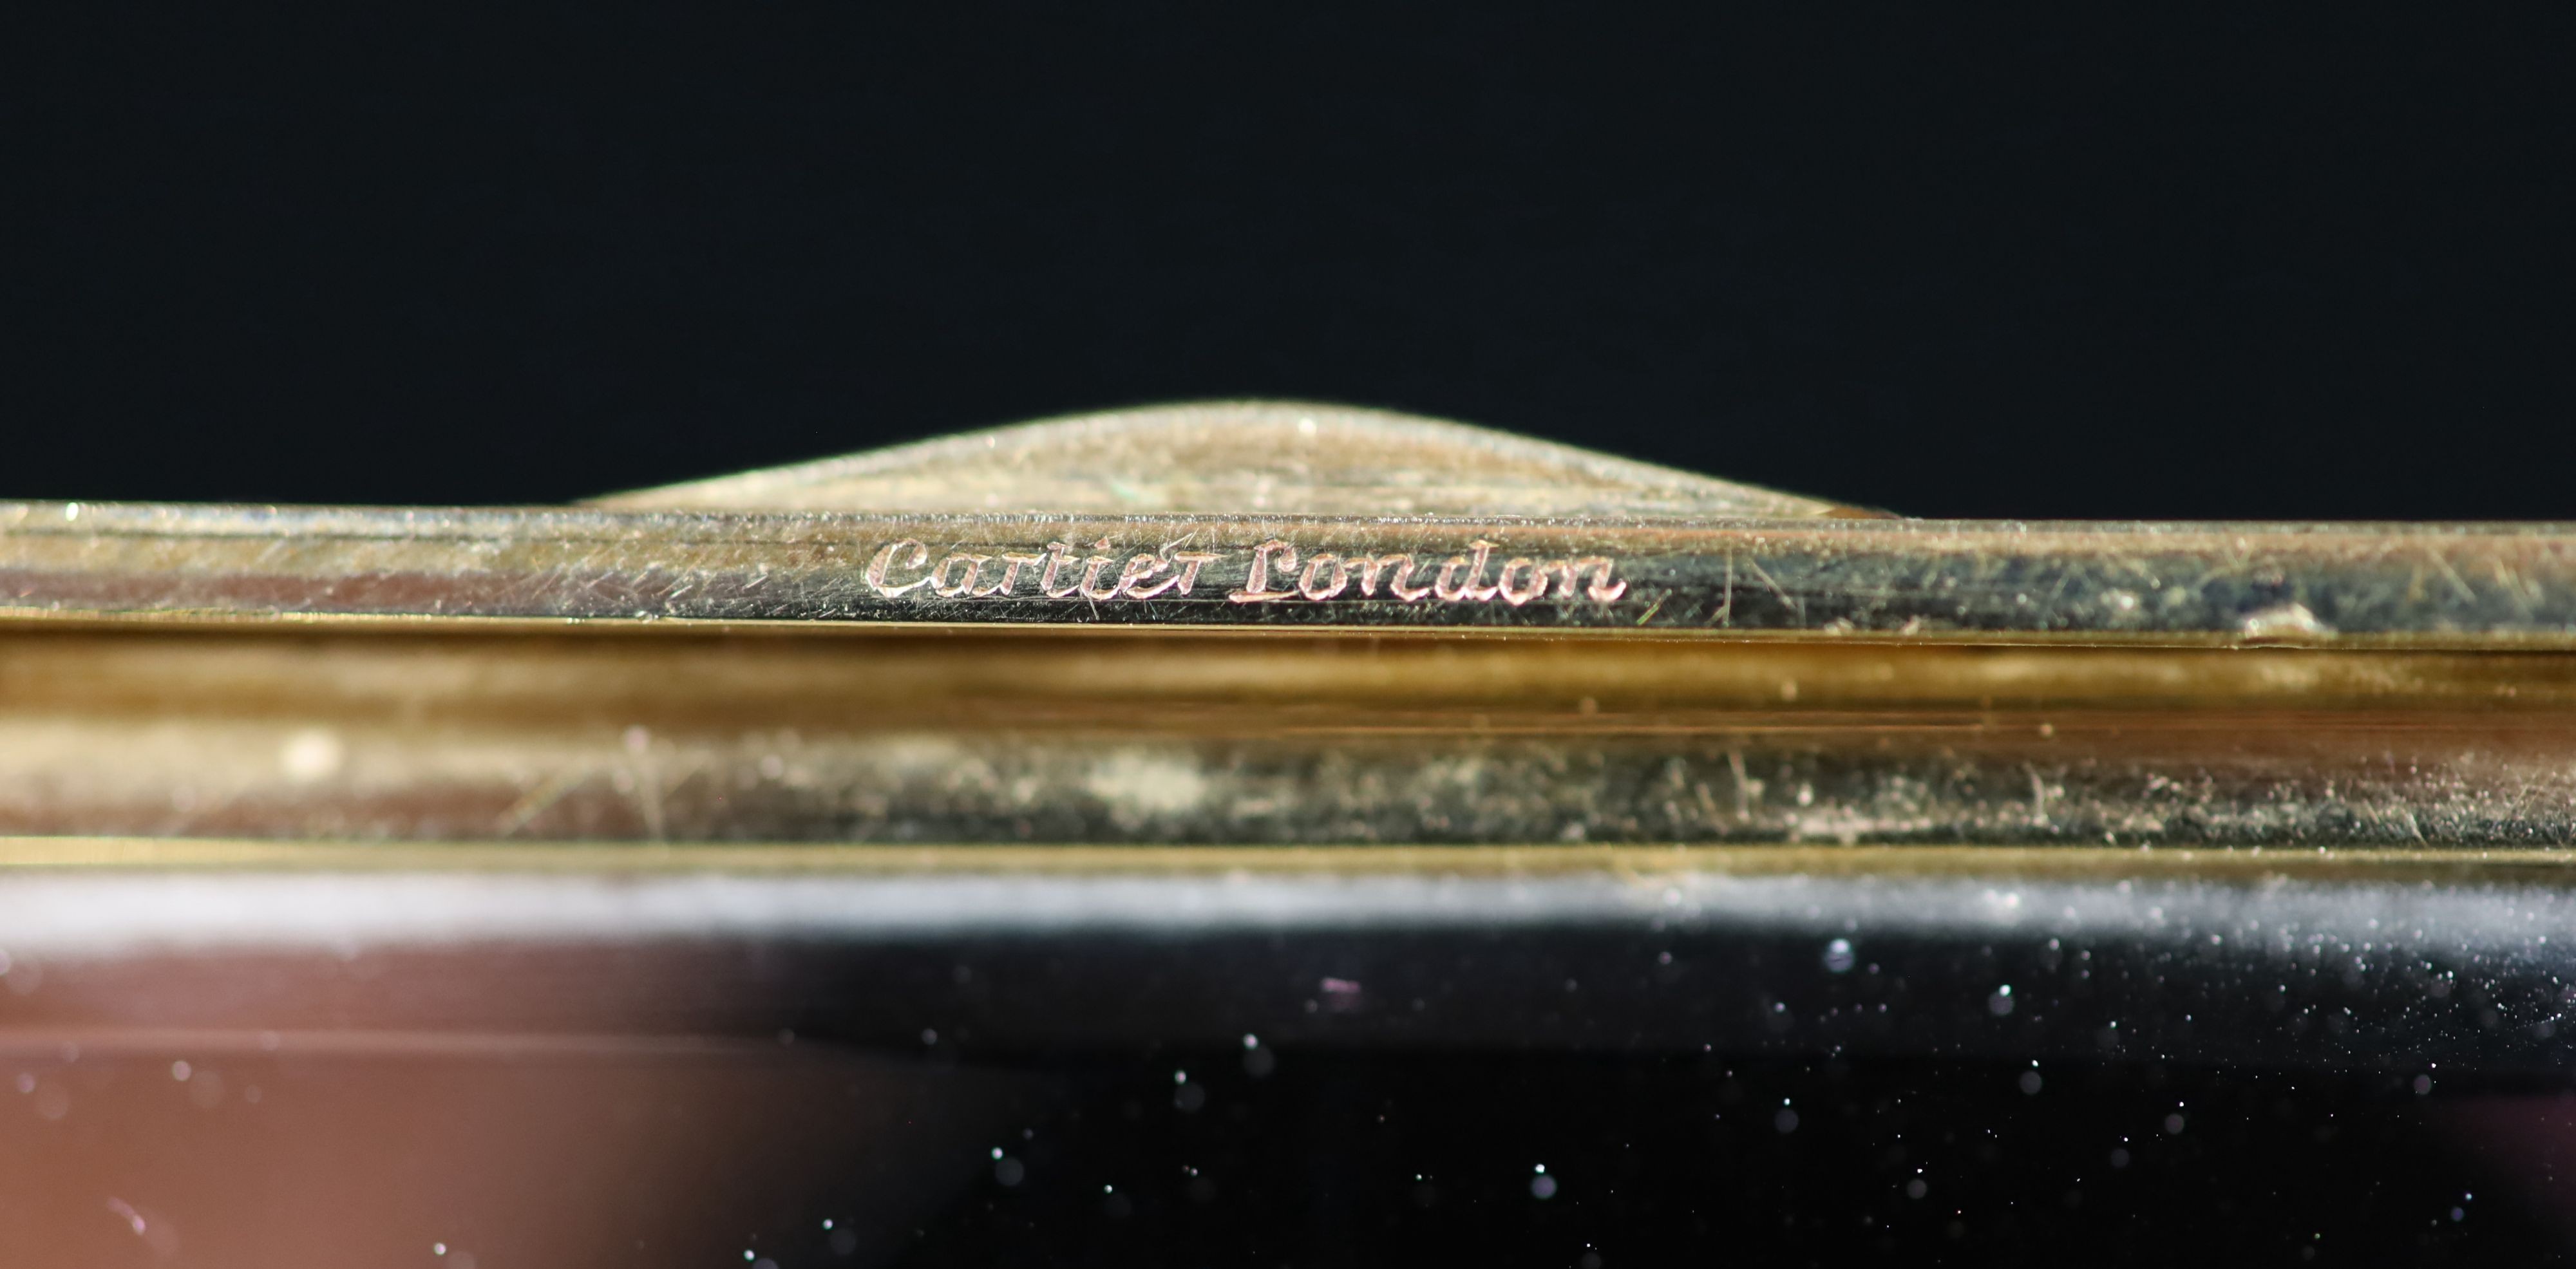 A 1930's Cartier 9ct gold compact, with diamond set thumbpiece